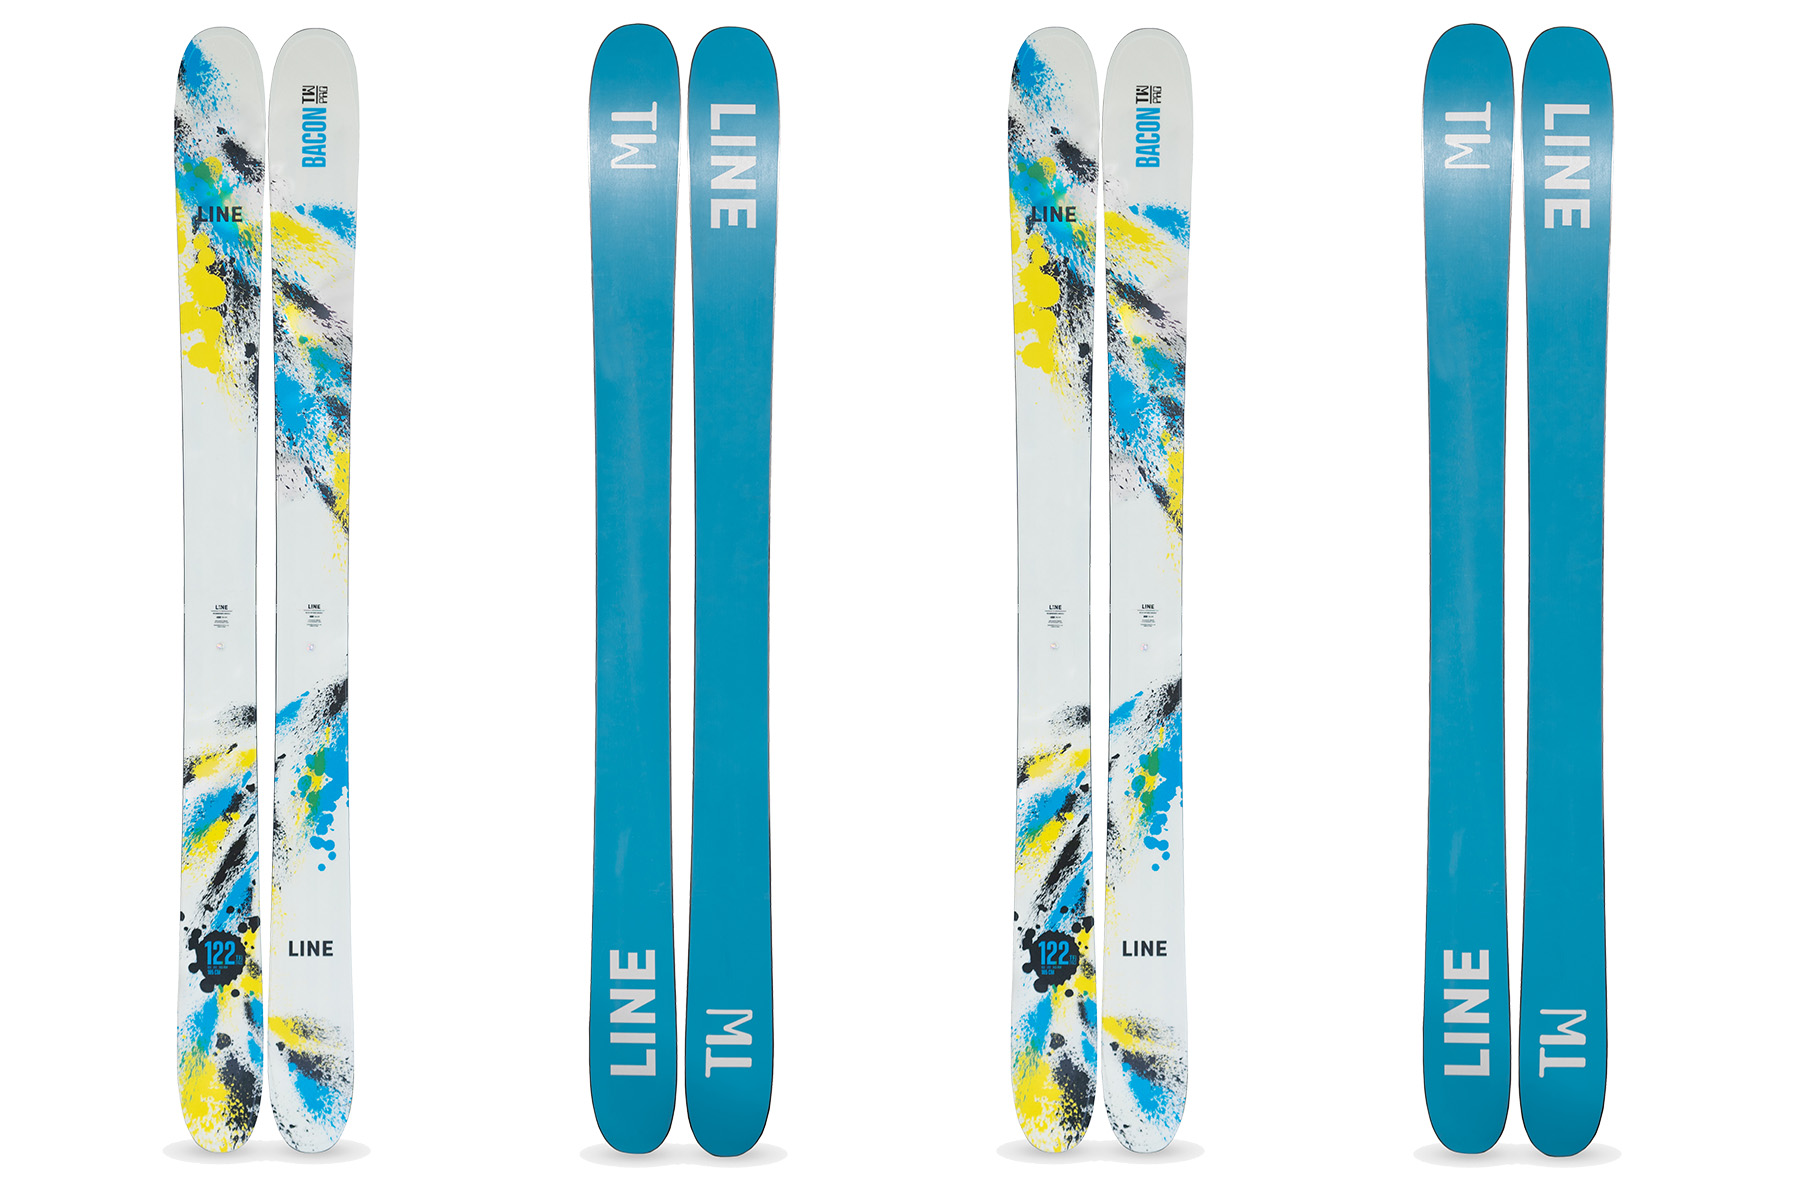 Line recently overhauled their Bacon collection for the 23/24 season, but now there’s already another member of the Bacon family — check out the limited-edition Bacon 122. BLISTER discusses the new ski